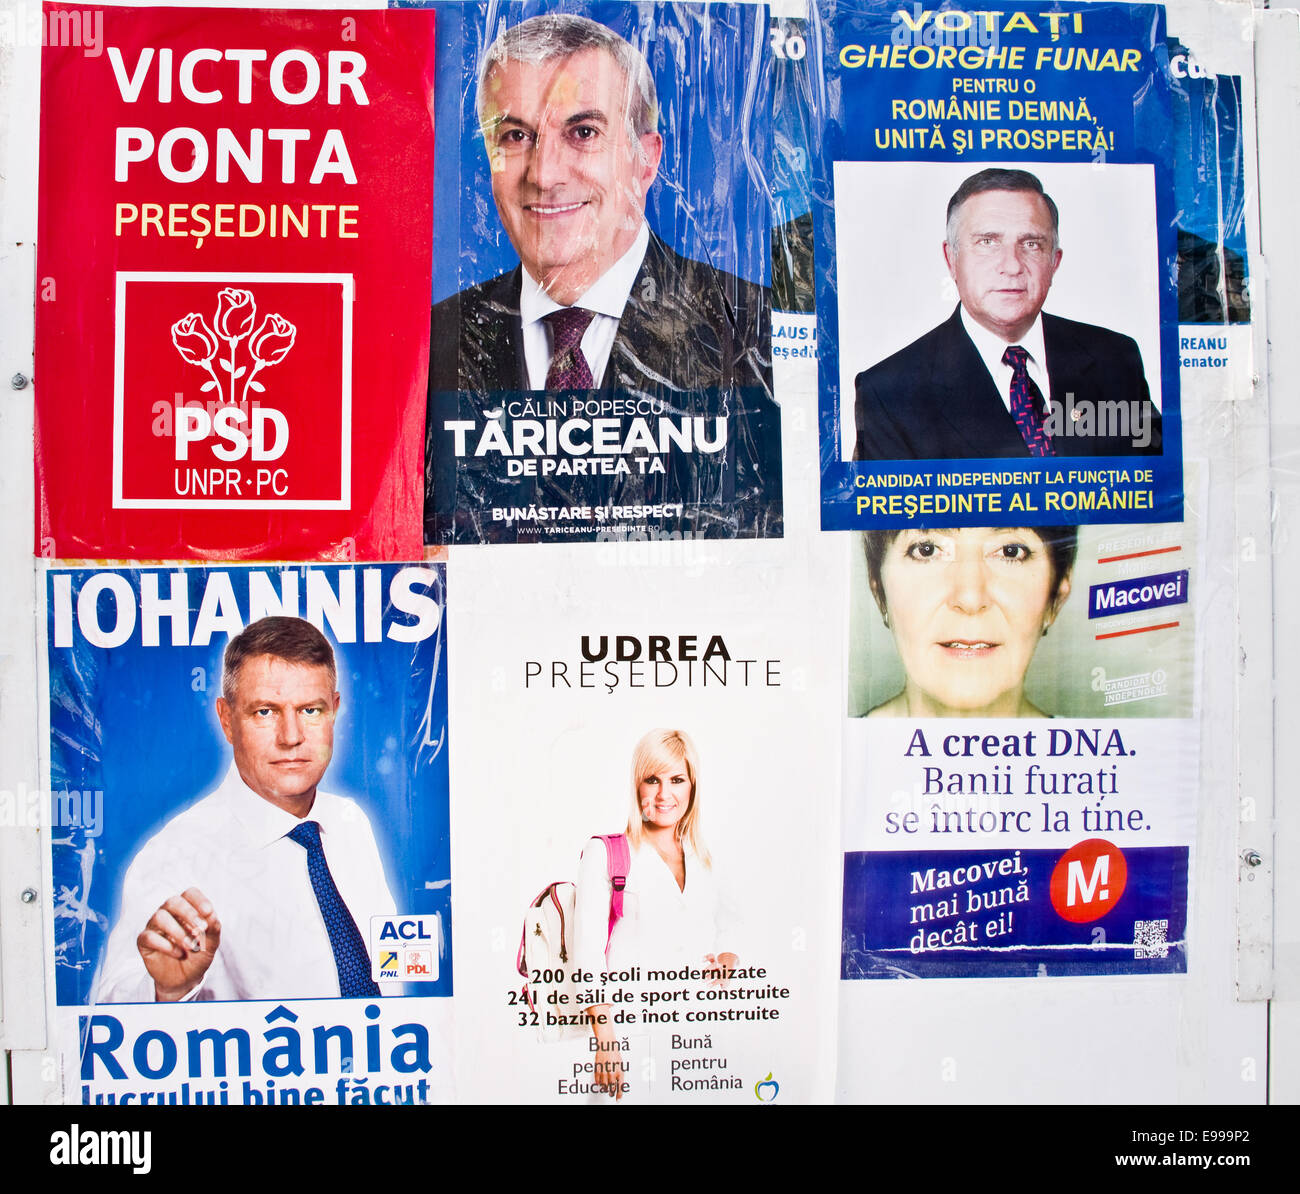 Campaign posters - Elections for President in Romania - Romanian presidential election November 2014 Stock Photo